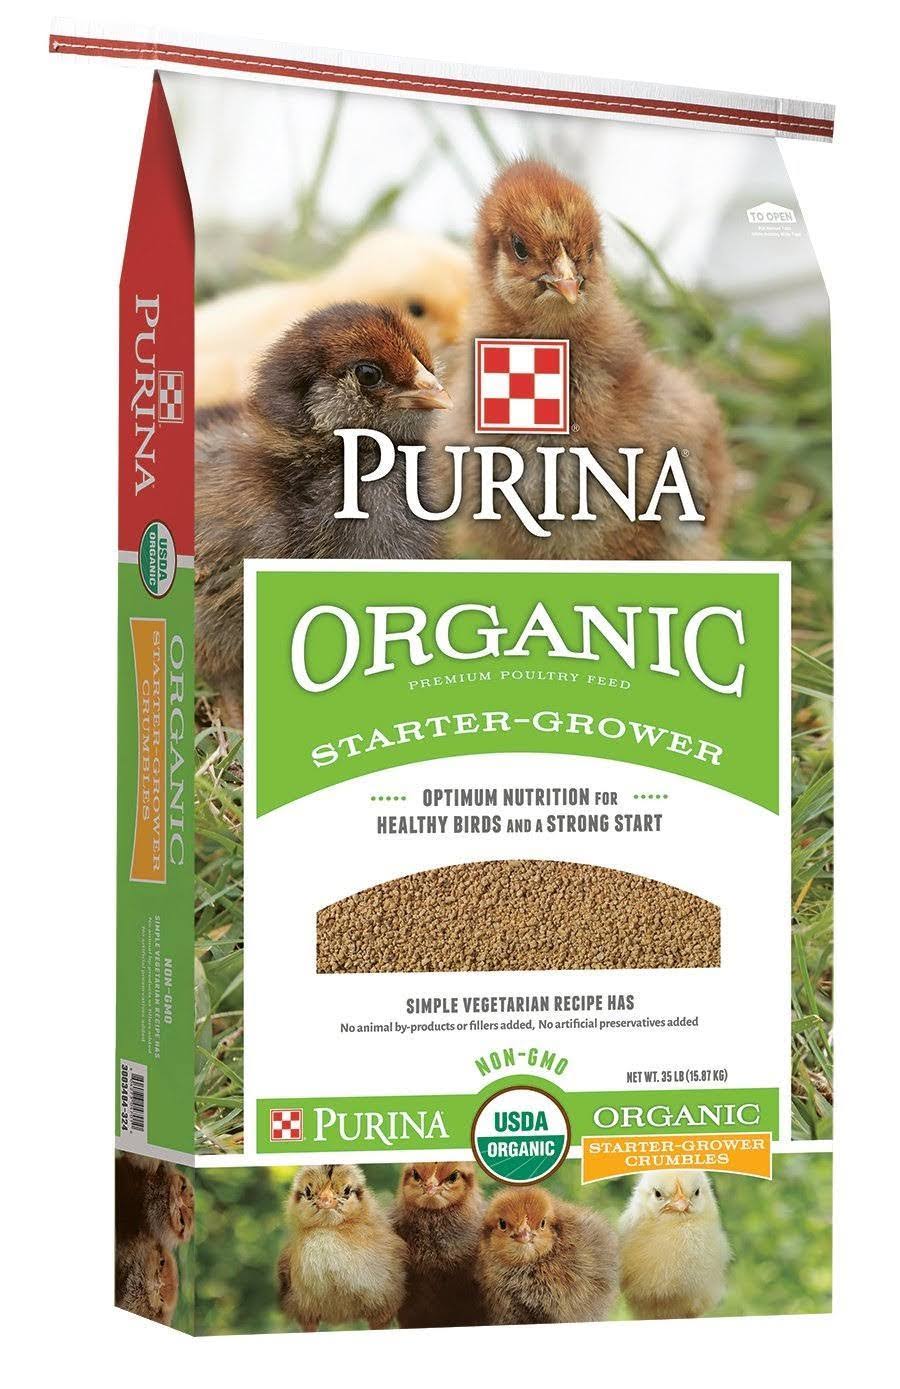 Purina 3003484-324 Organic Starter-Grower Crumbles Non-GMO 35 lbs. Poultry Feed